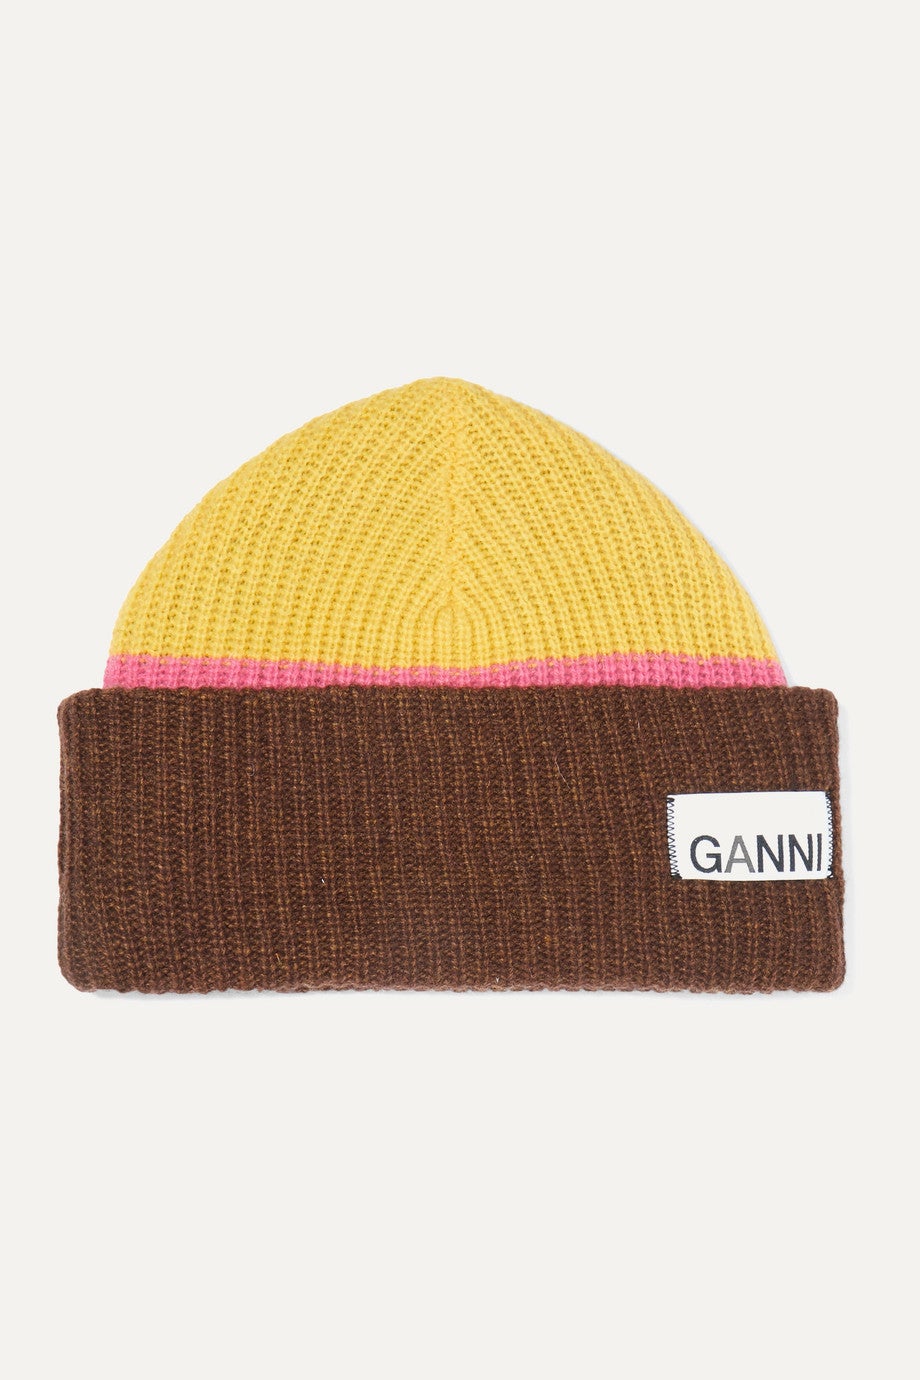 Long hats. Monki Classic Beanie Beige. Small wooly Beige Beanie. What is a Beanie.